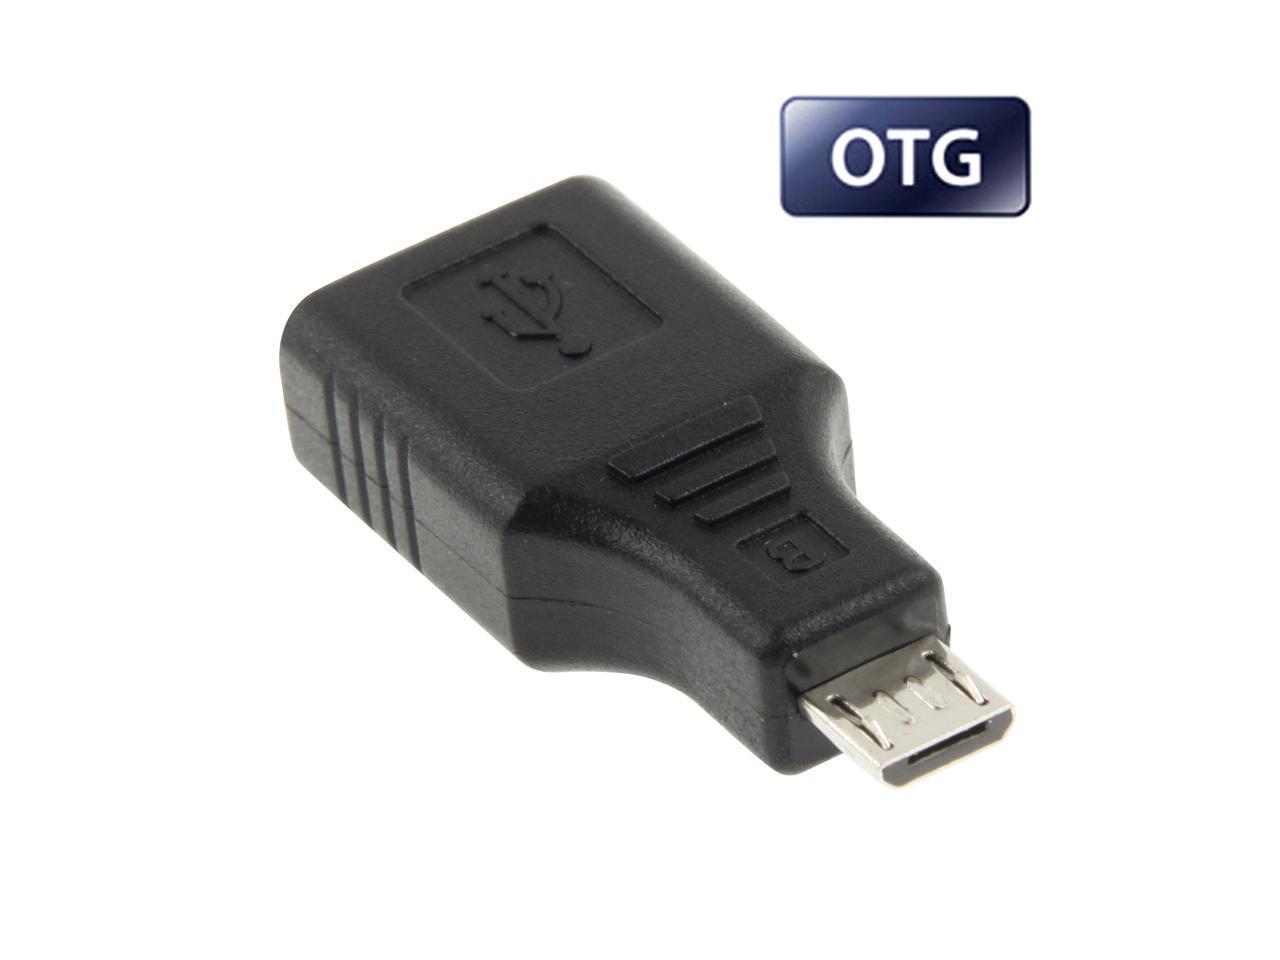 T230 / T330 / T530 7.0 / 8.0 / 10.1 /P600 8.0 / 10.1 2014 Edition Micro USB to USB 2.0 Adapter with OTG Function Gal Note 10.1 GALAXY Tab 4 T310 / P5200 For Galaxy Tab 3 Charge Cable Adapater 